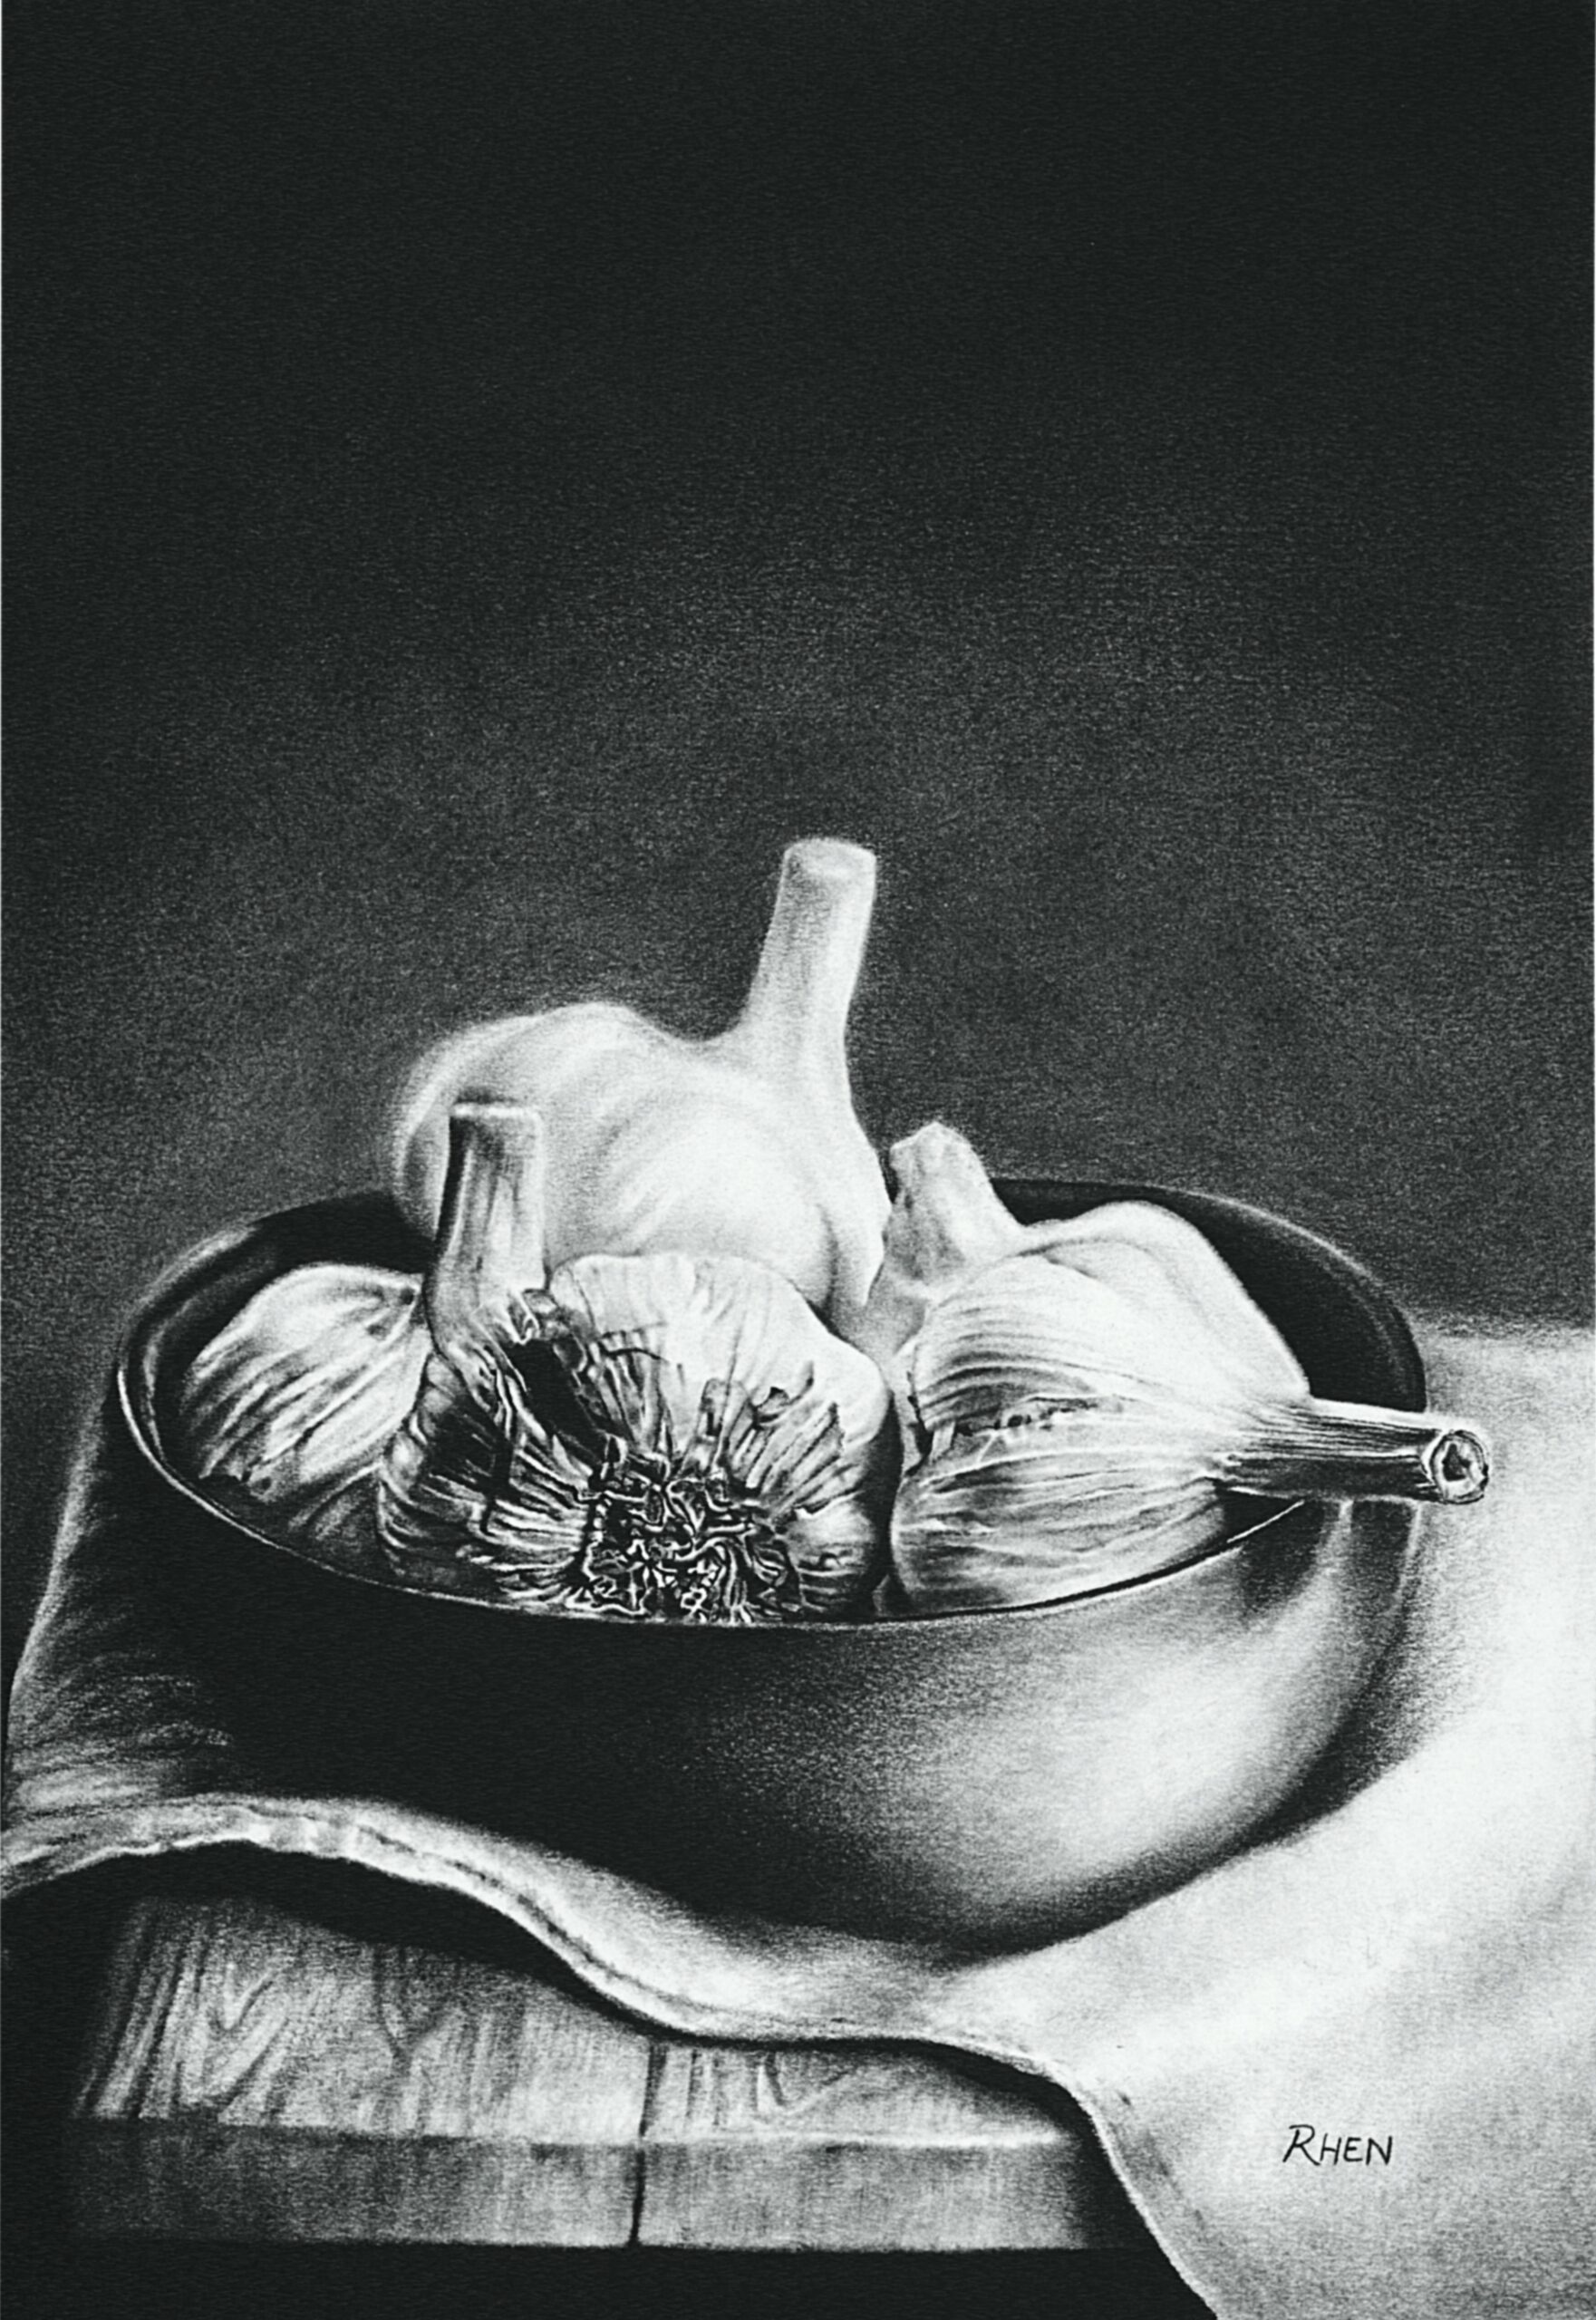 Bowl of Garlic, charcoal drawing on paper by South African artist Rhen Hanekom